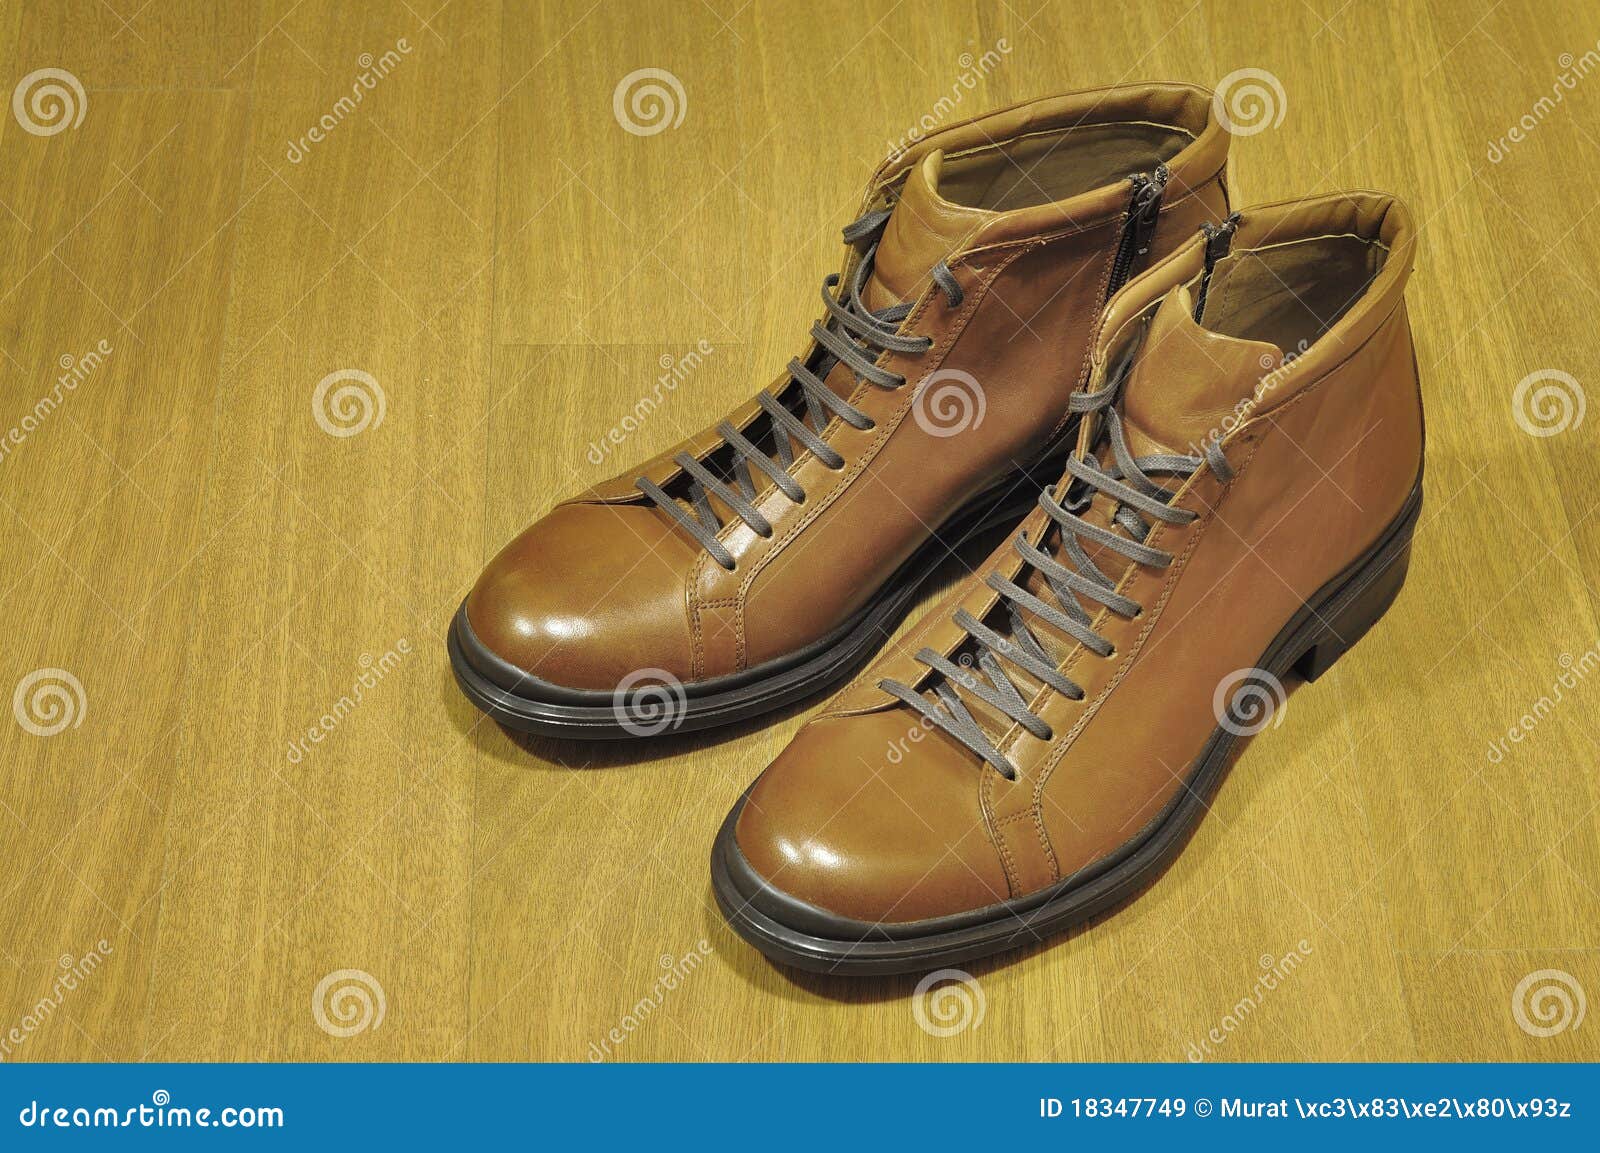 New Boots on a Wooden Floor Stock Image - Image of leather, shoe: 18347749